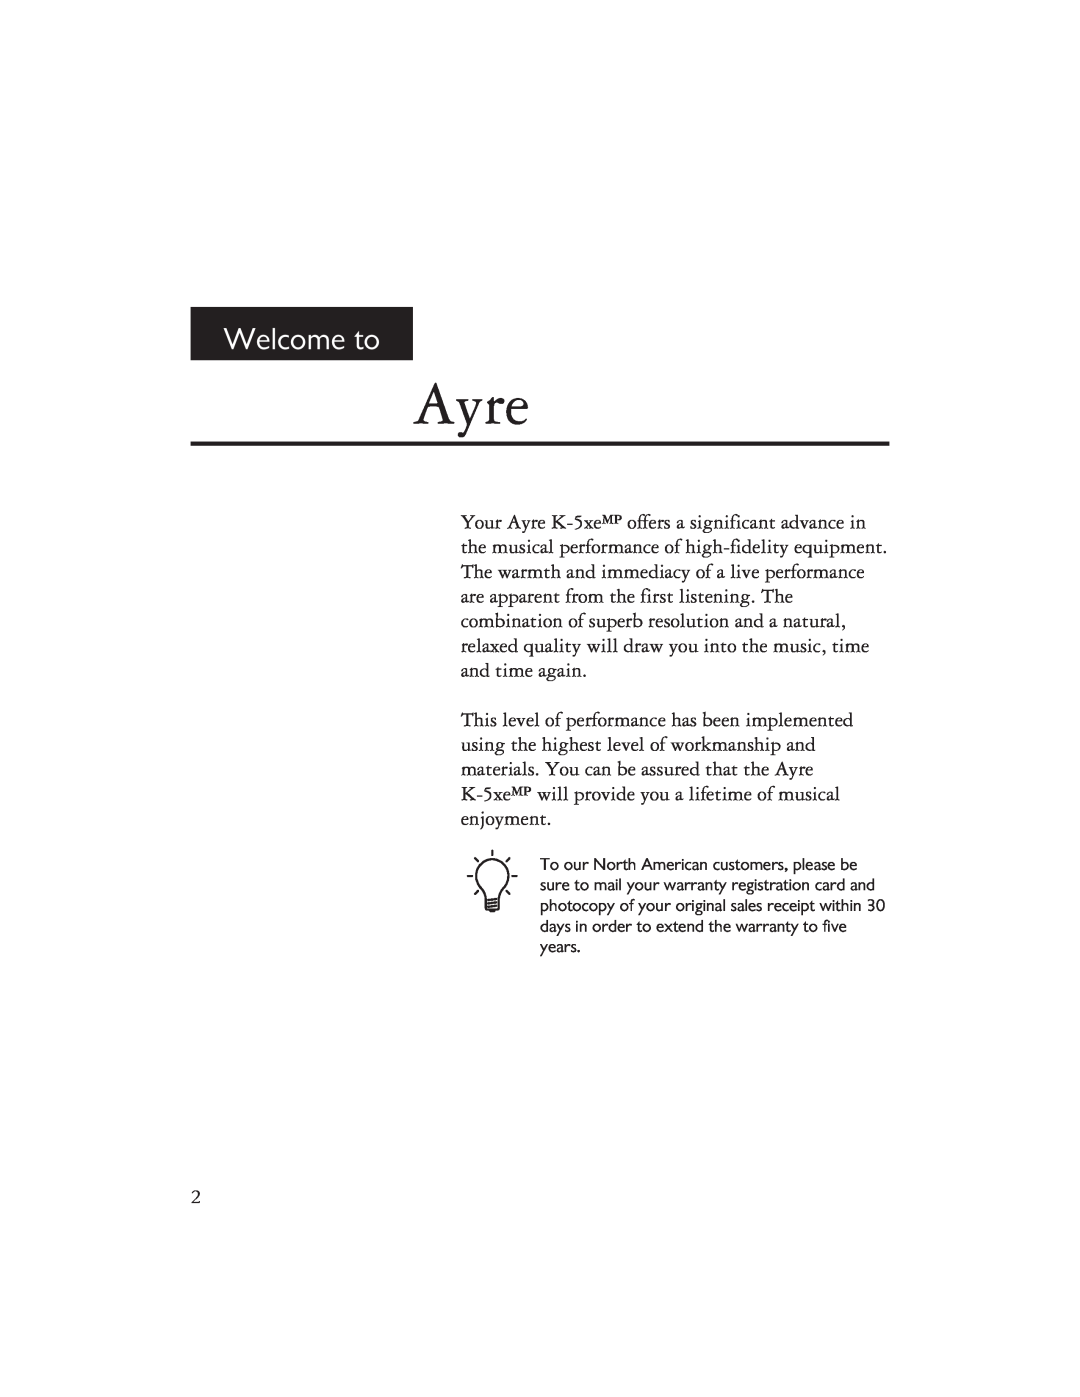 Ayre Acoustics K-5XEMP owner manual Ayre, Welcome to 